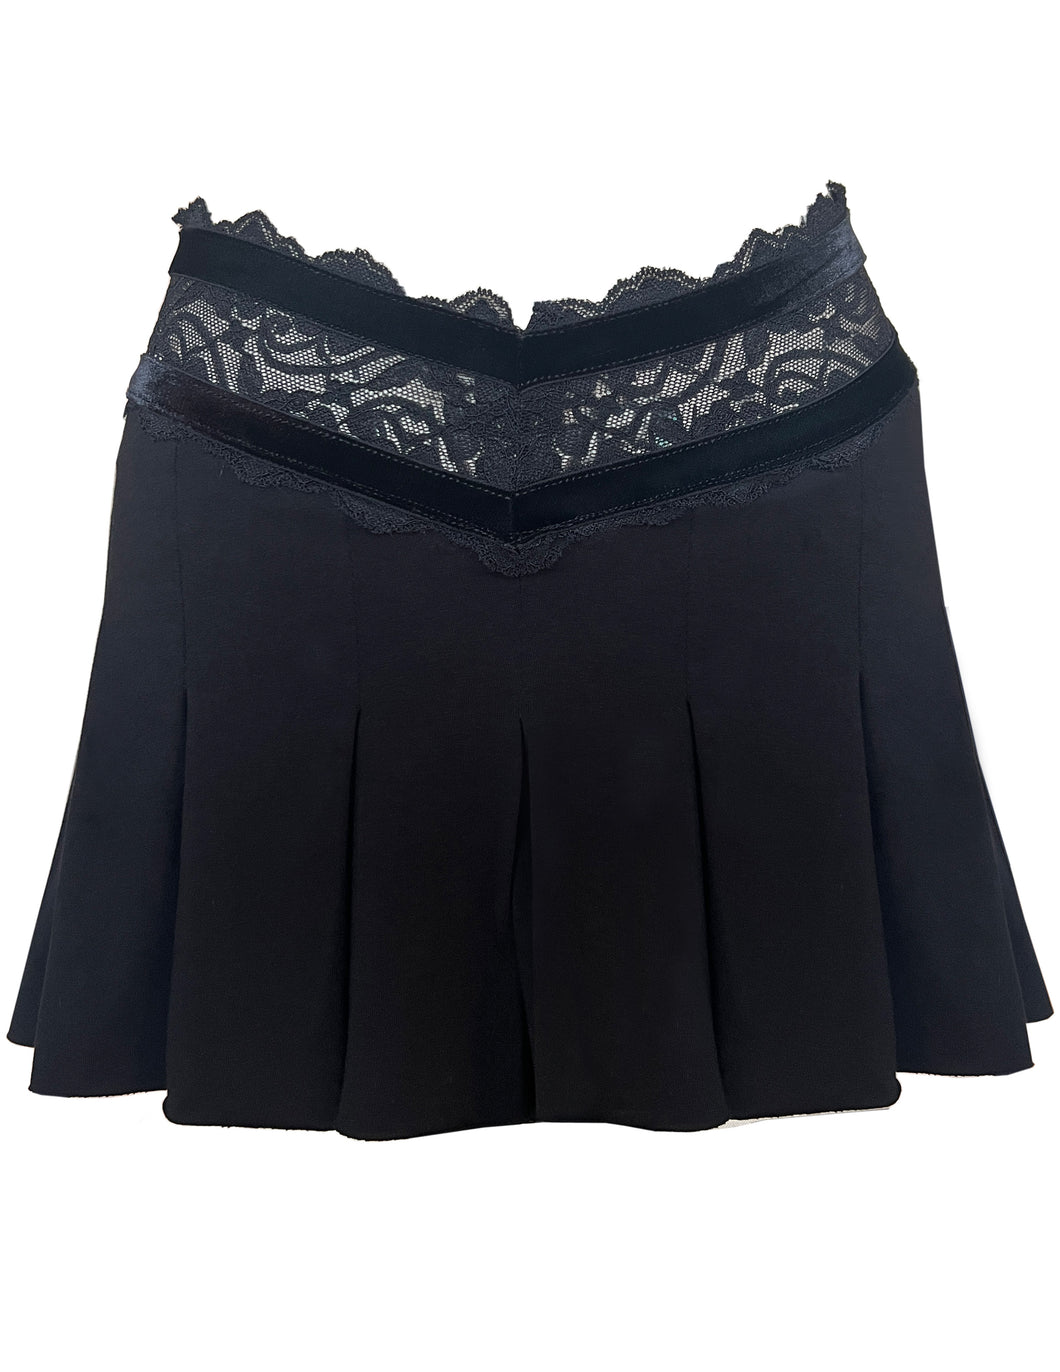 Cheer mini skirt with black lace